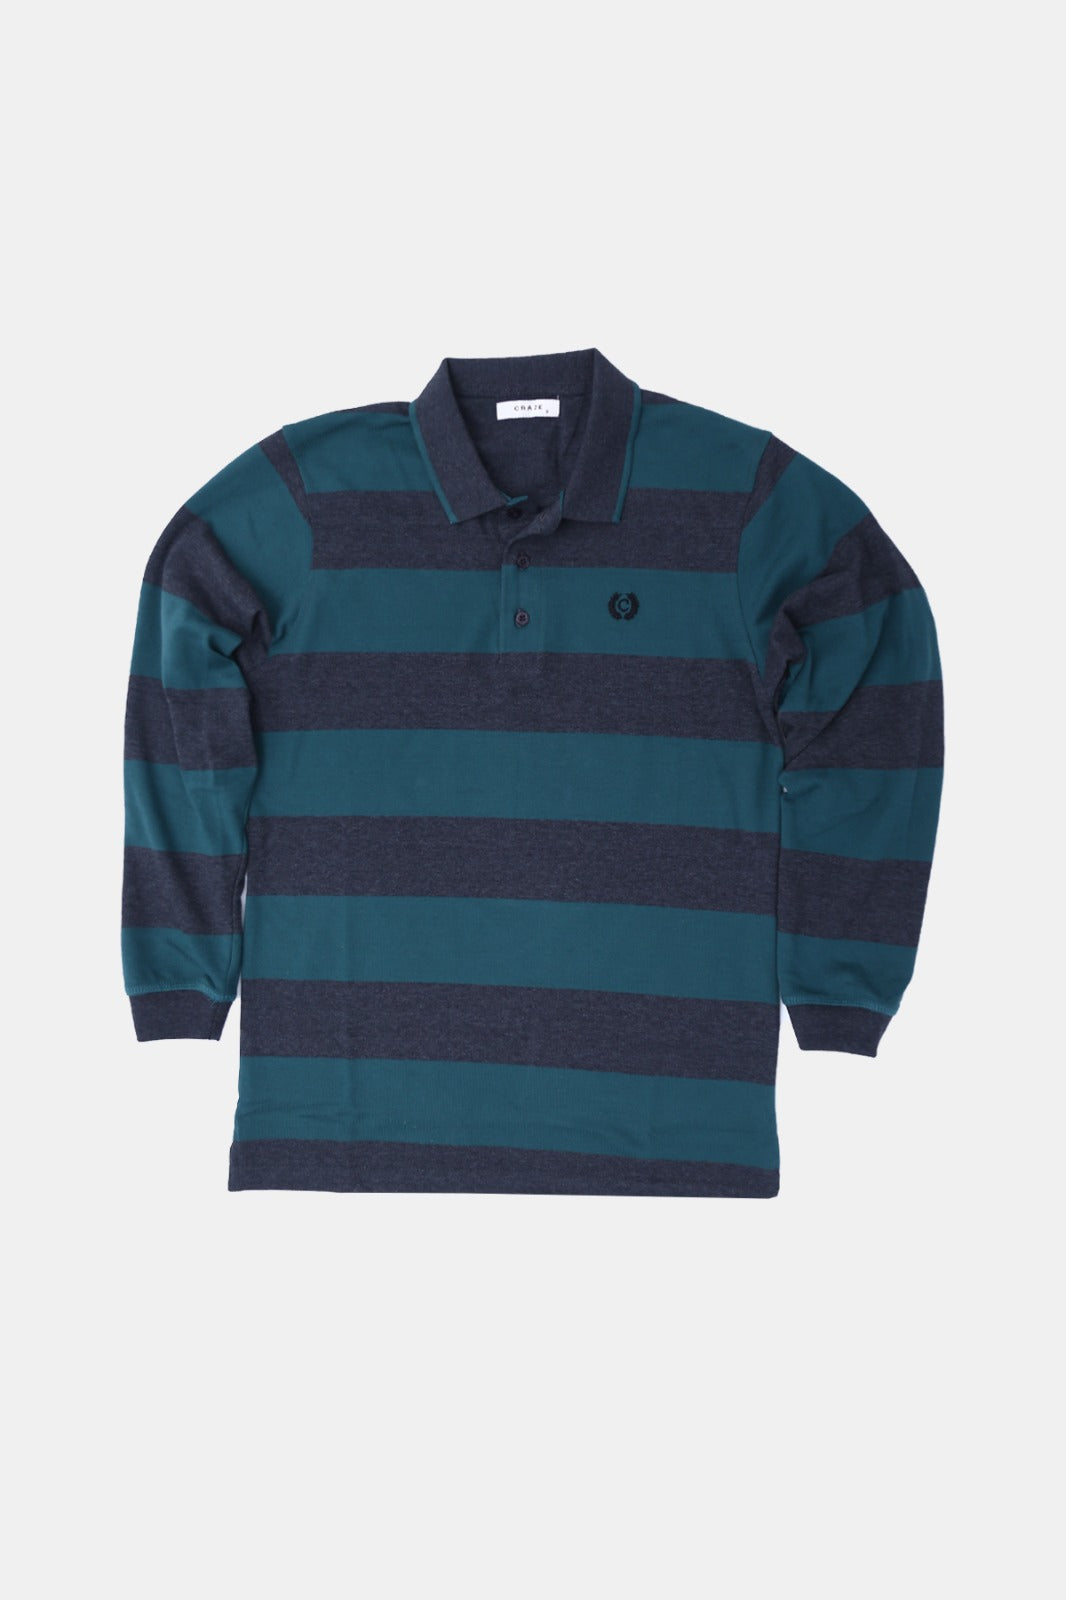 Green and Grey striped Full Sleeves Polo